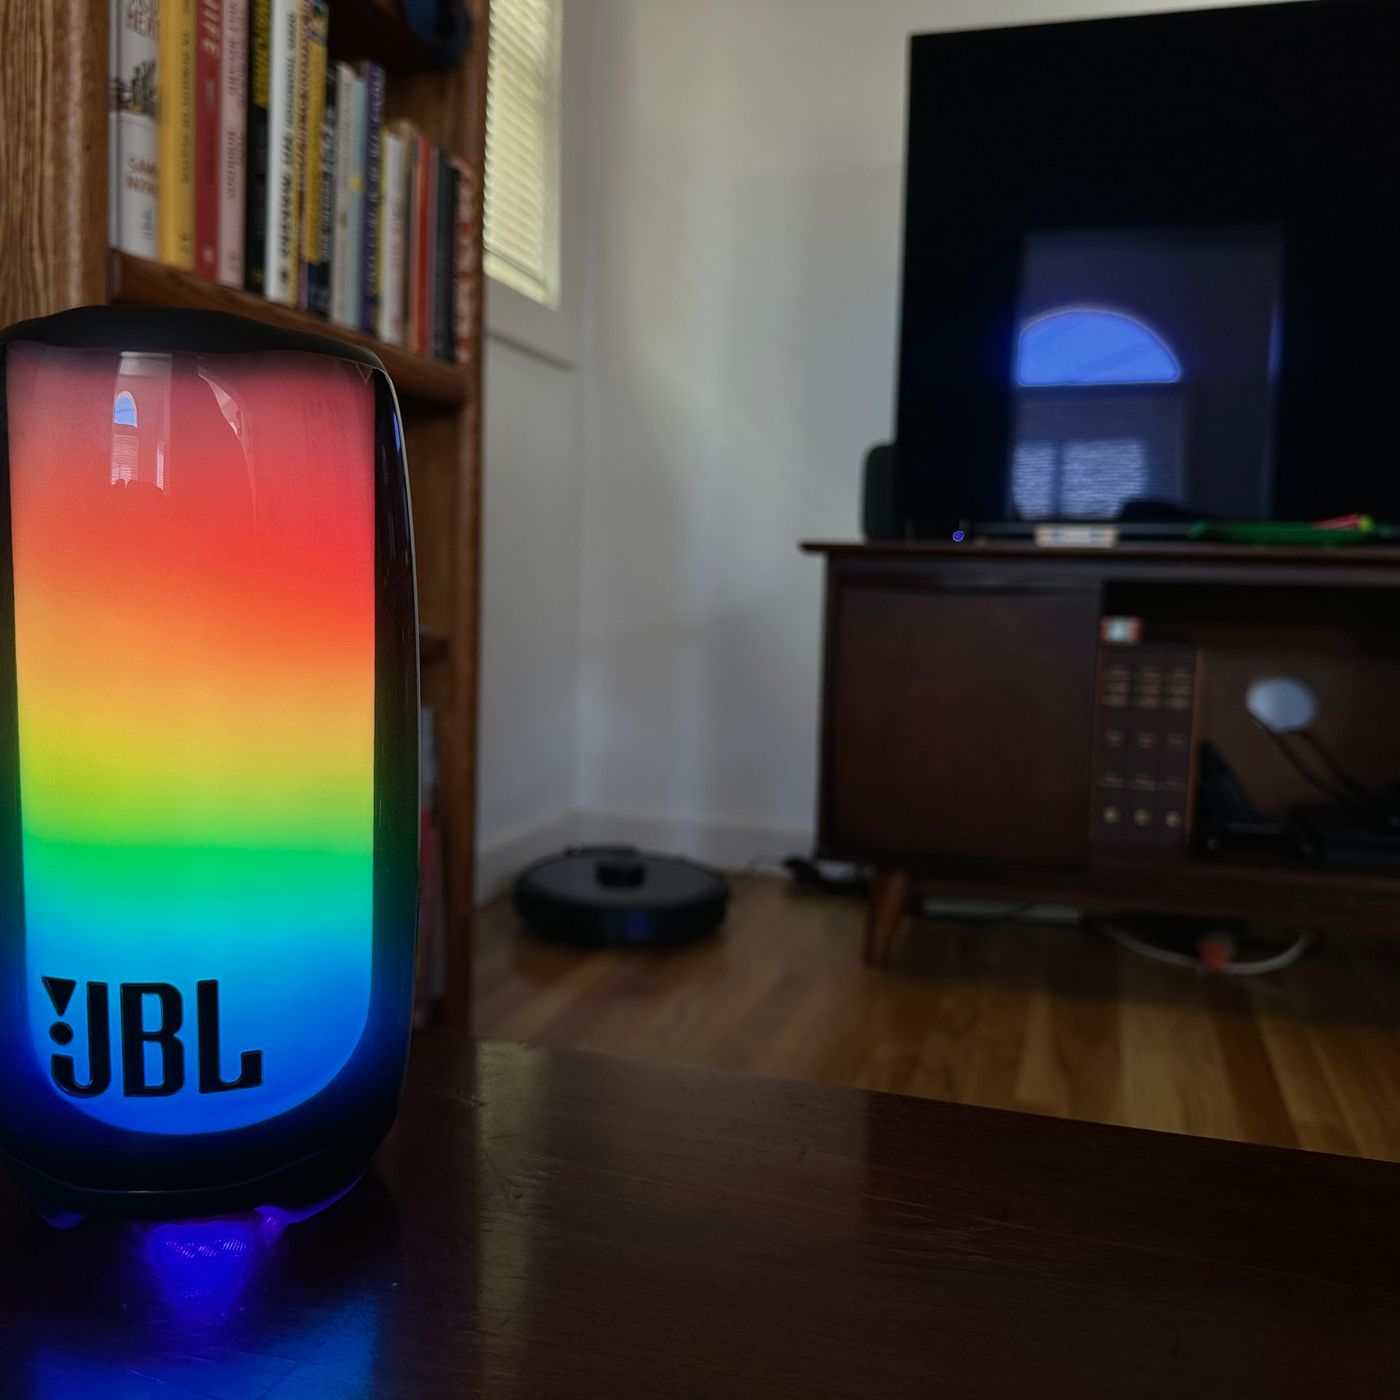 JBL Pulse 5 review: this light-up speaker will get the party started